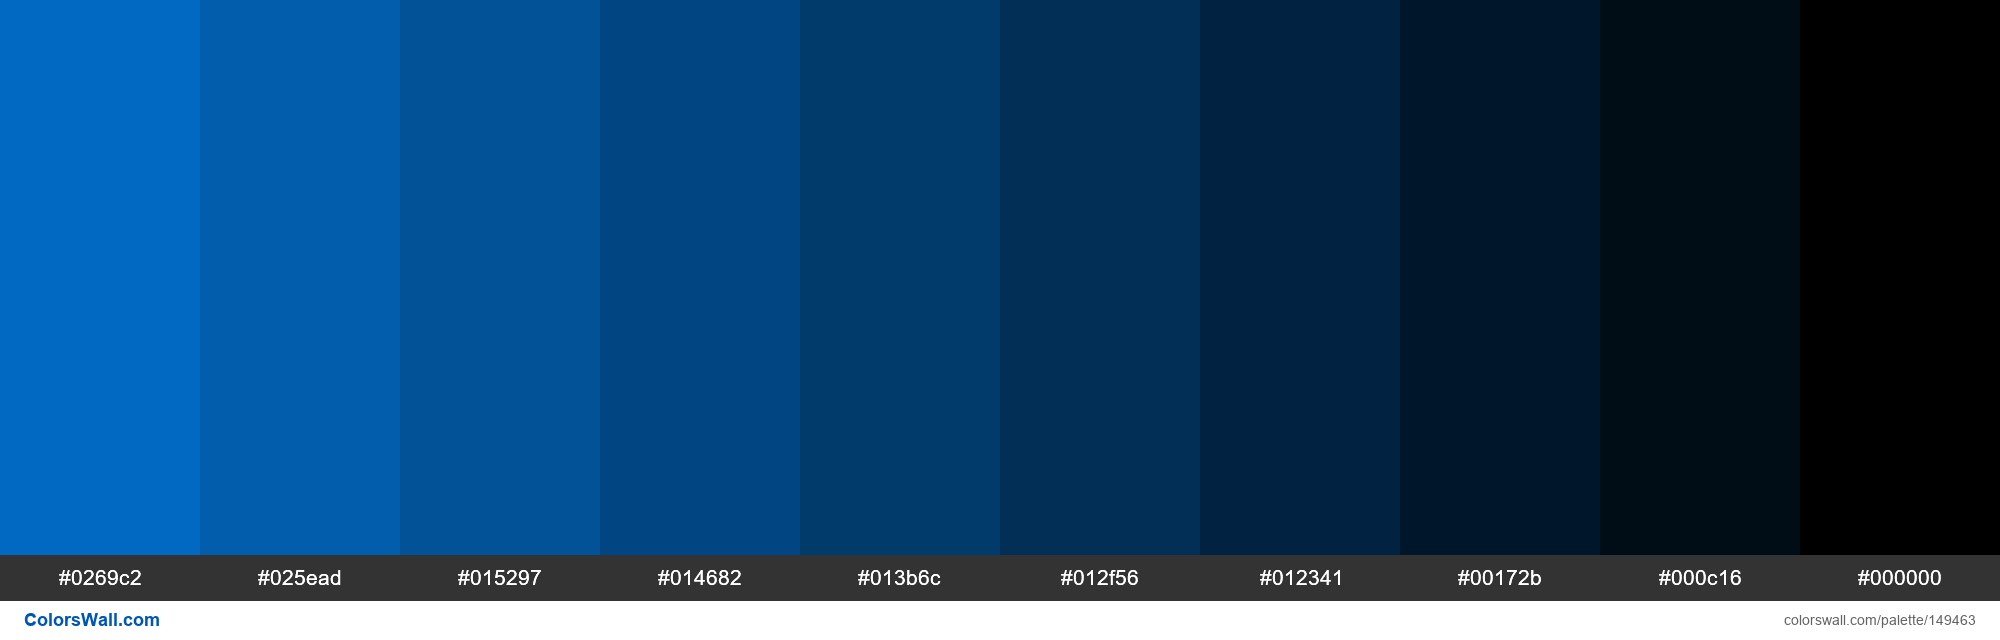 Bootstrap 4 primary blue tints colors palette - ColorsWall